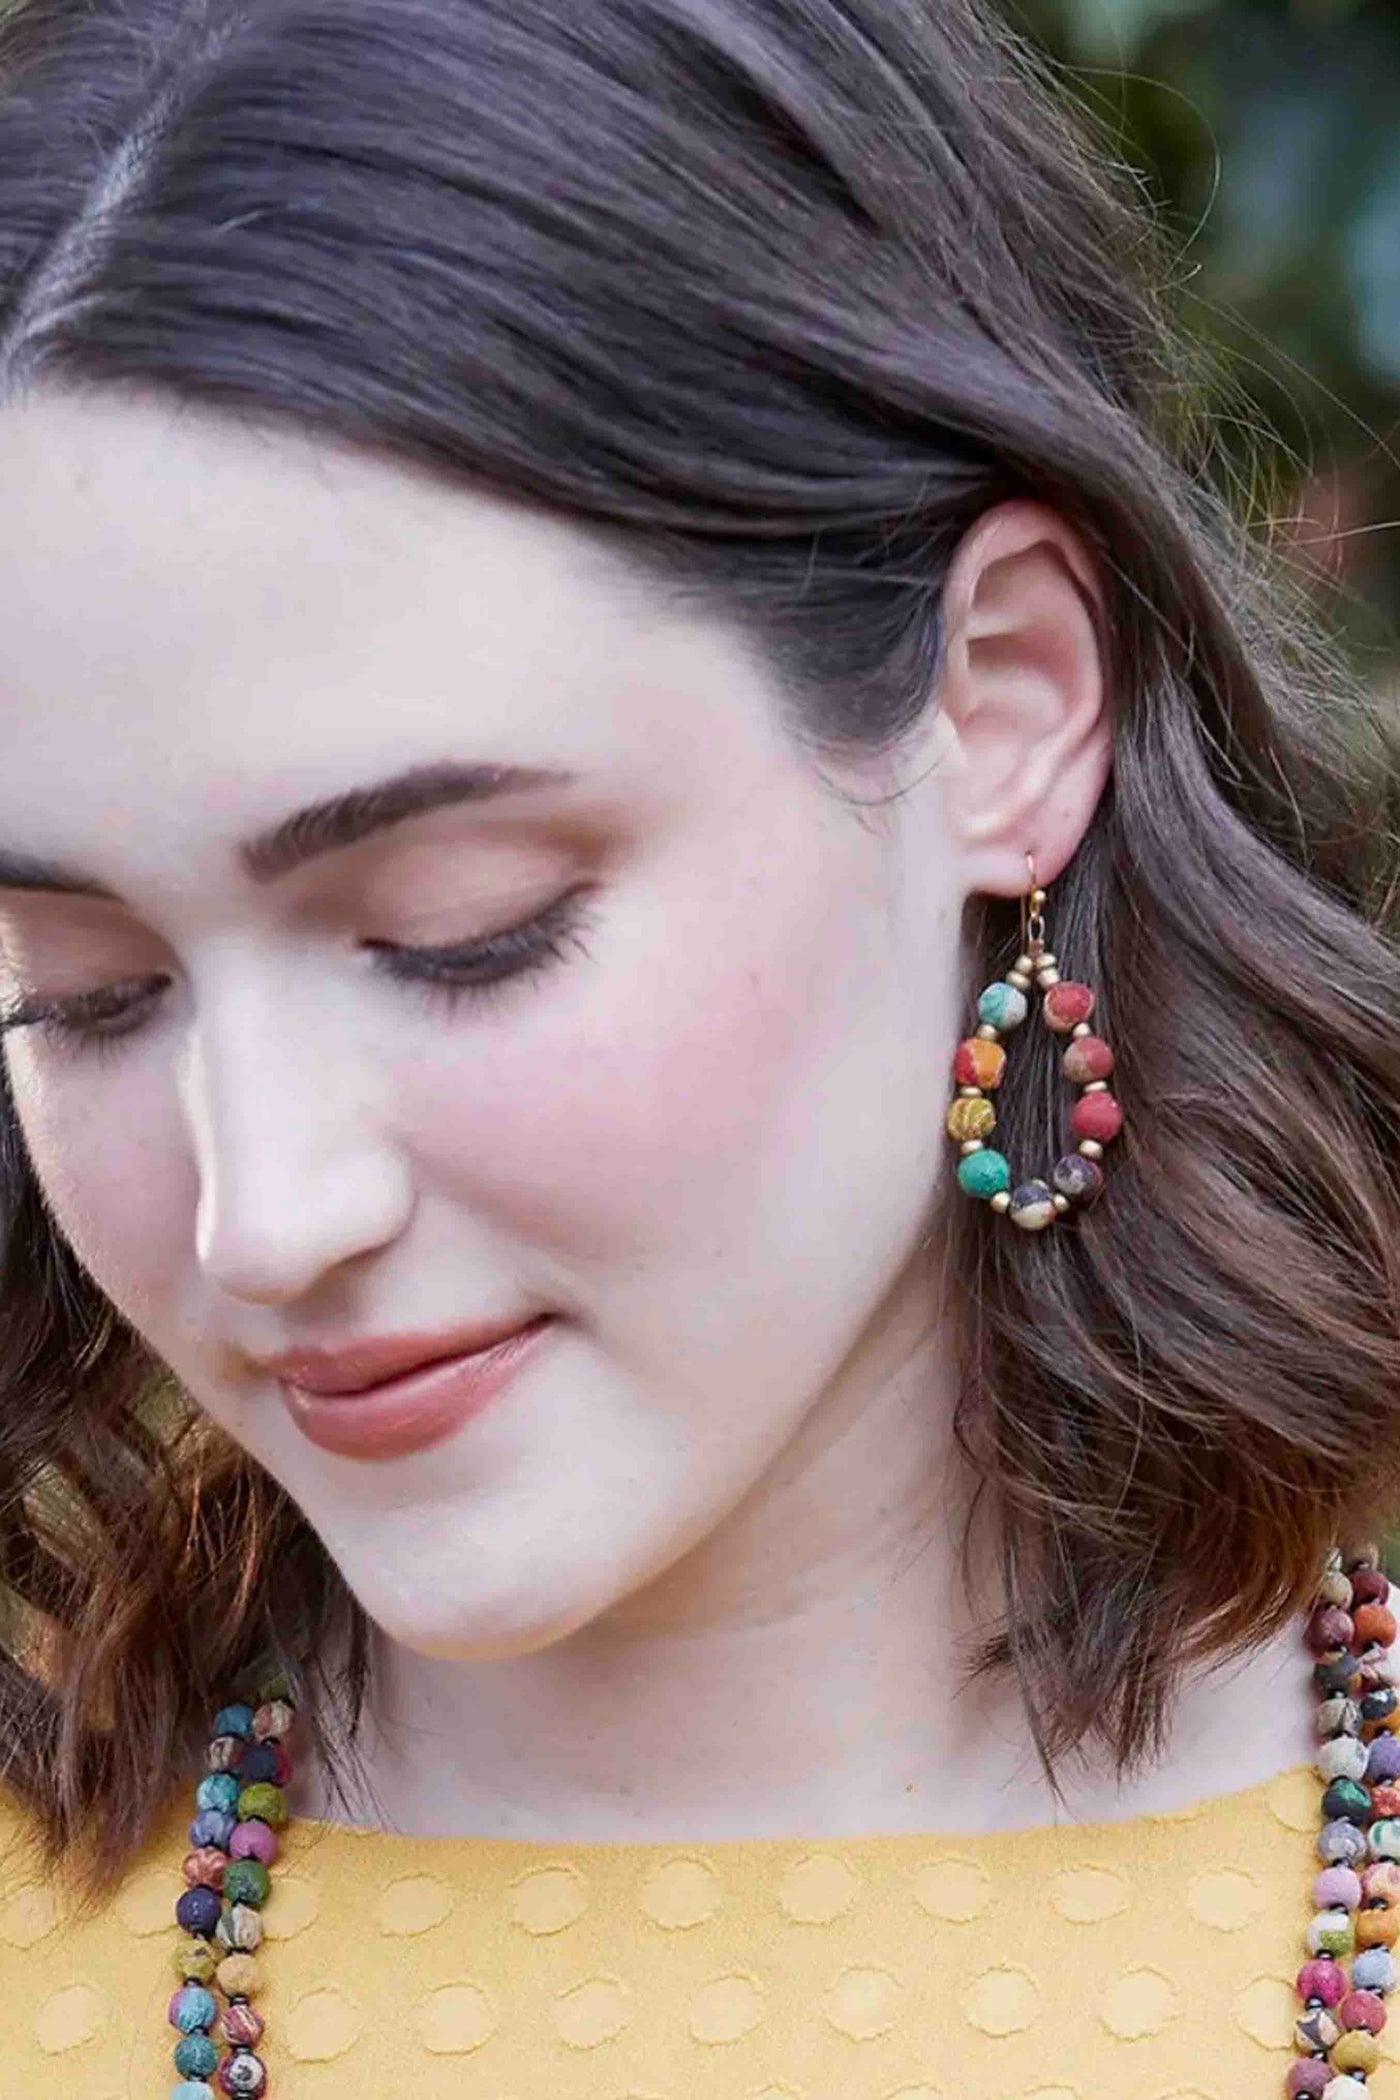 model wearing the Multicolored Kantha Beaded Teardop Earrings by World Finds and matching necklaces